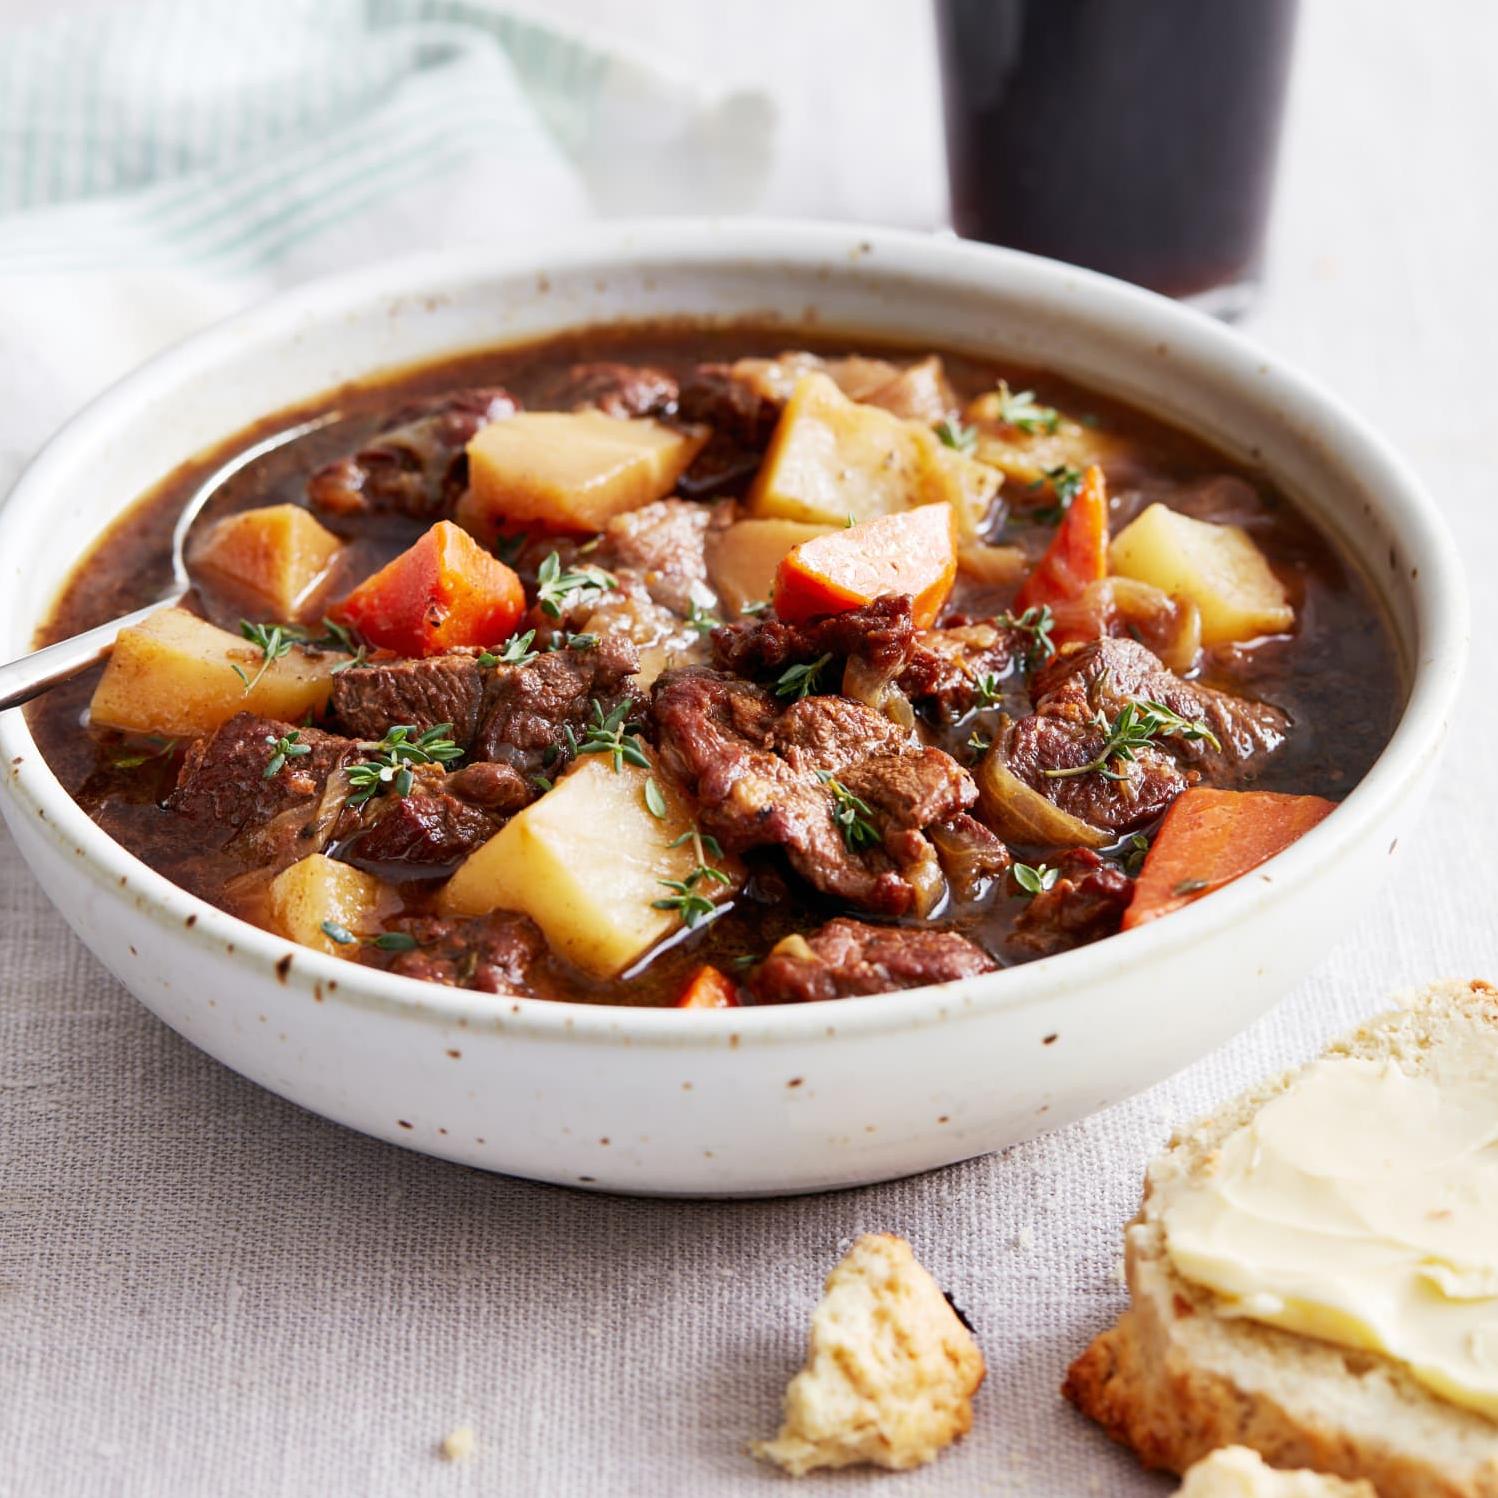  Whether you're Irish or not, this hearty lamb stew is perfect for any occasion.